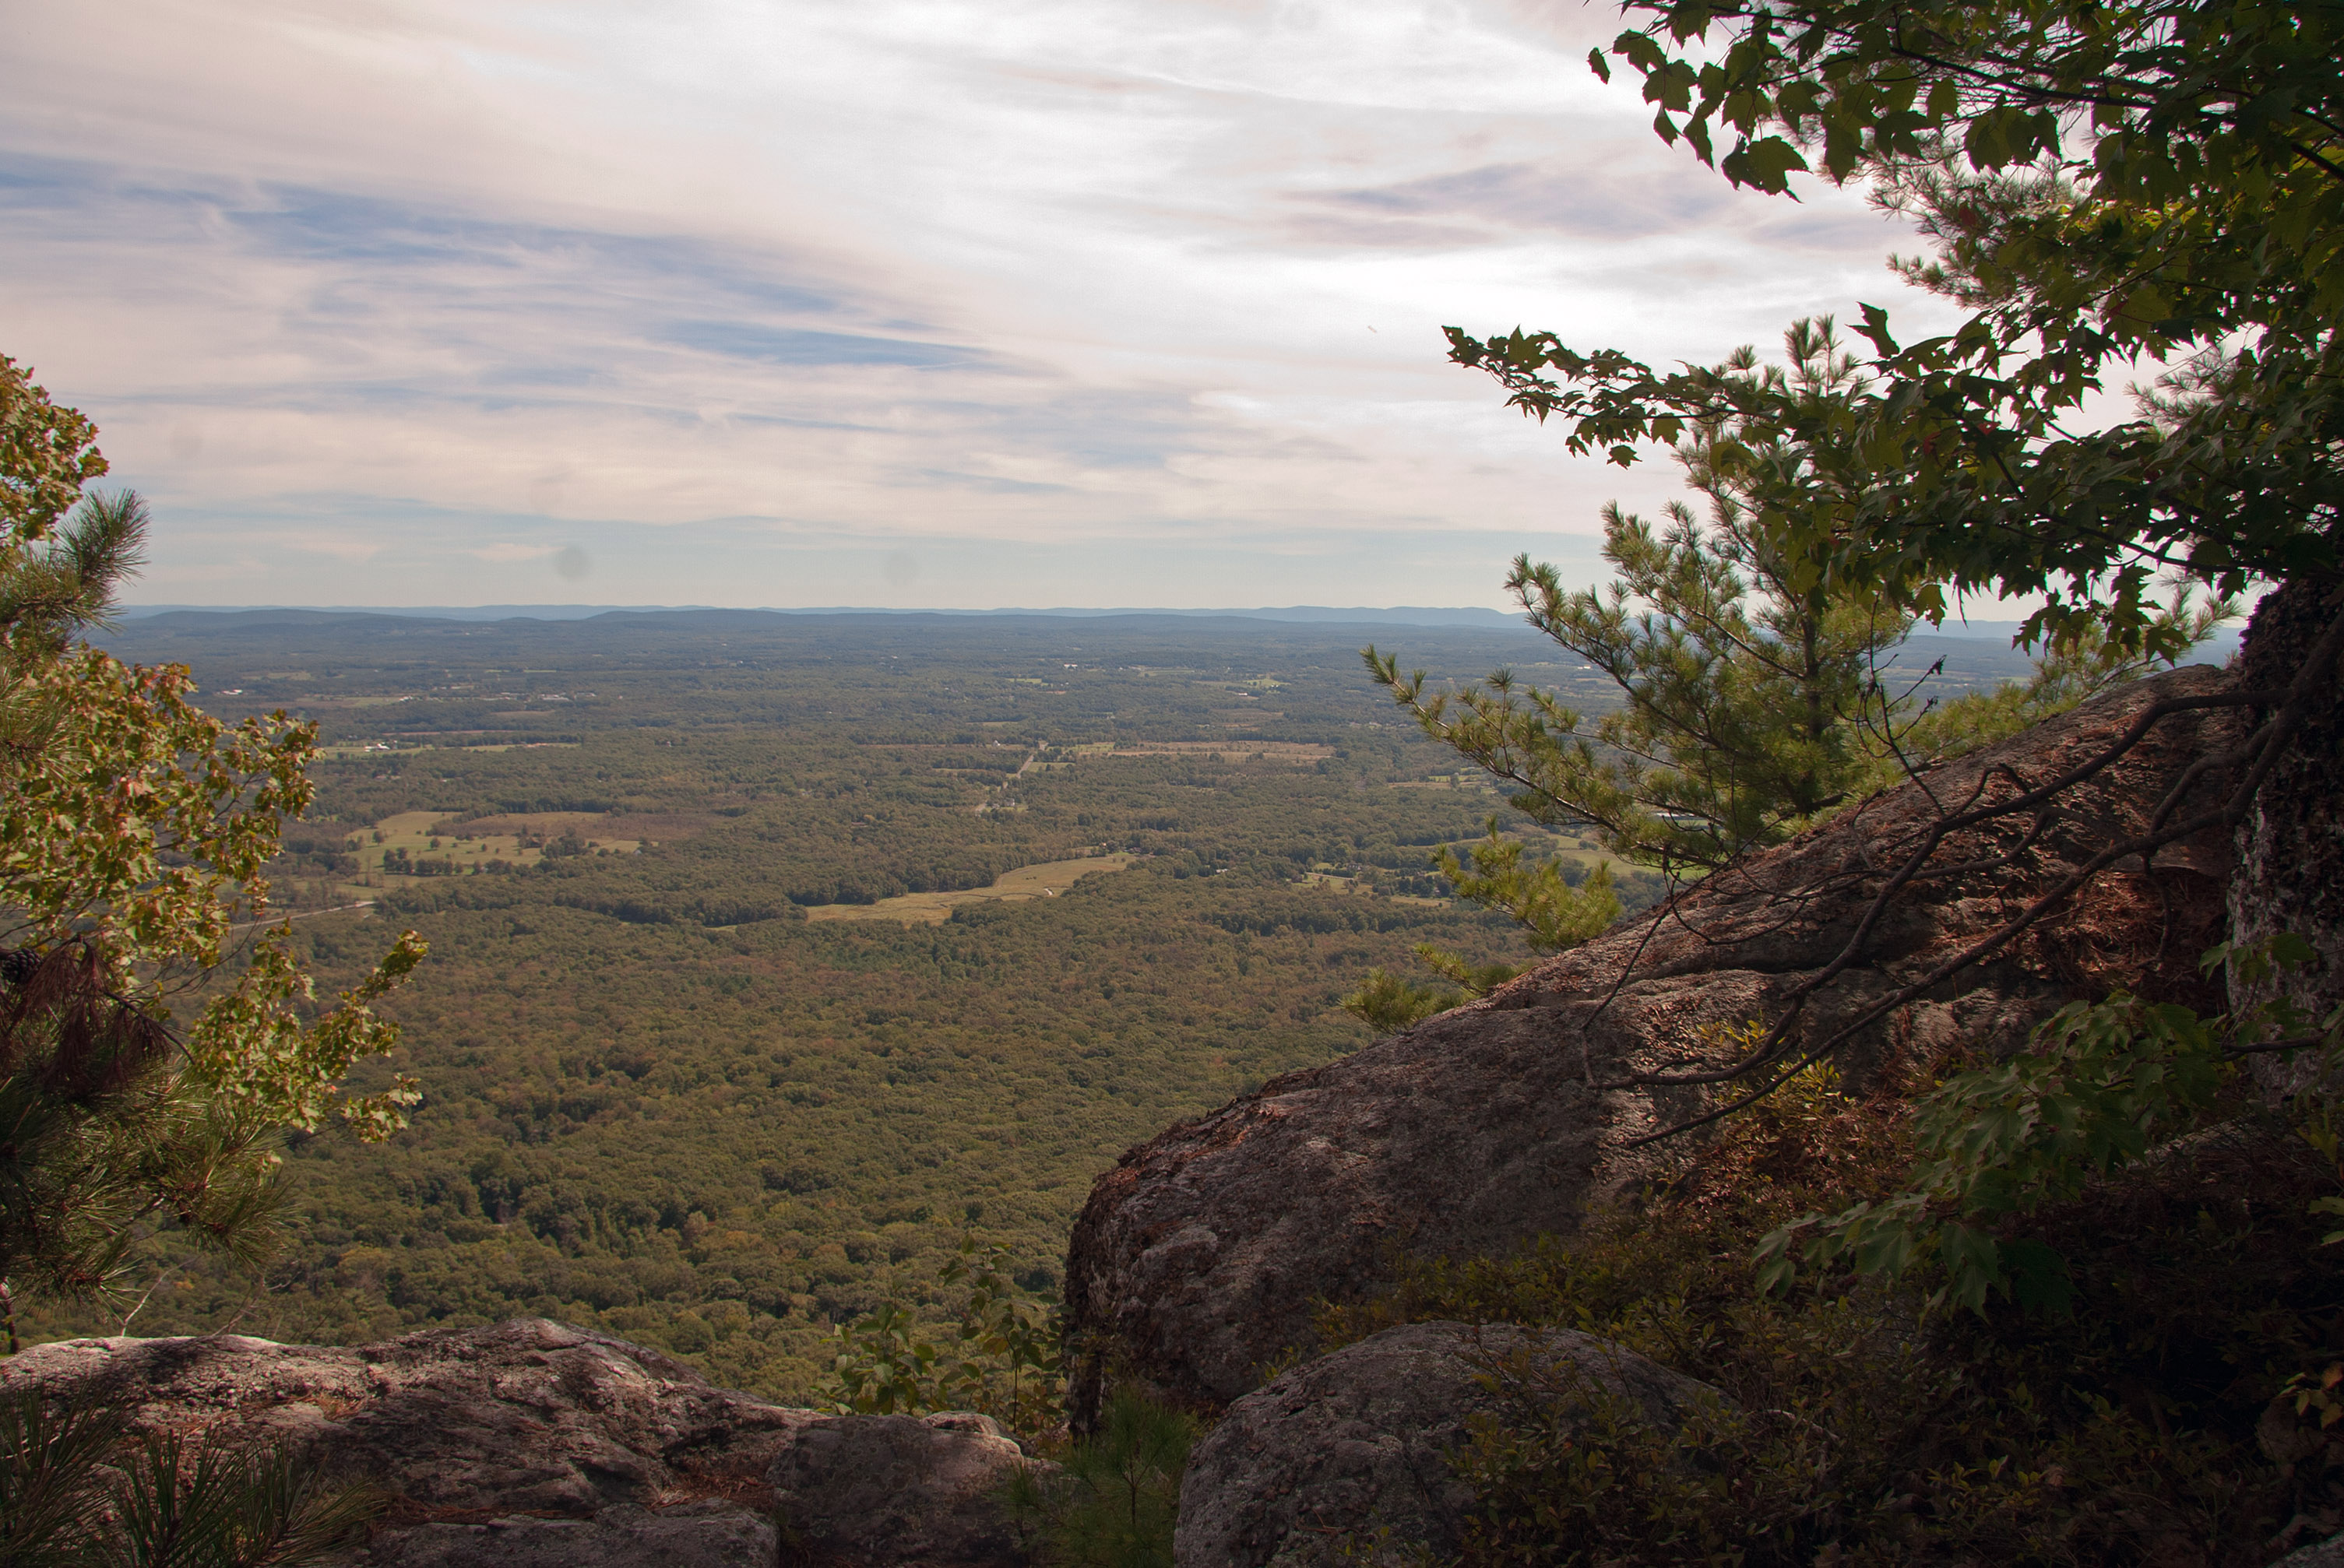 A view from a cliff at minnewaska state park photo